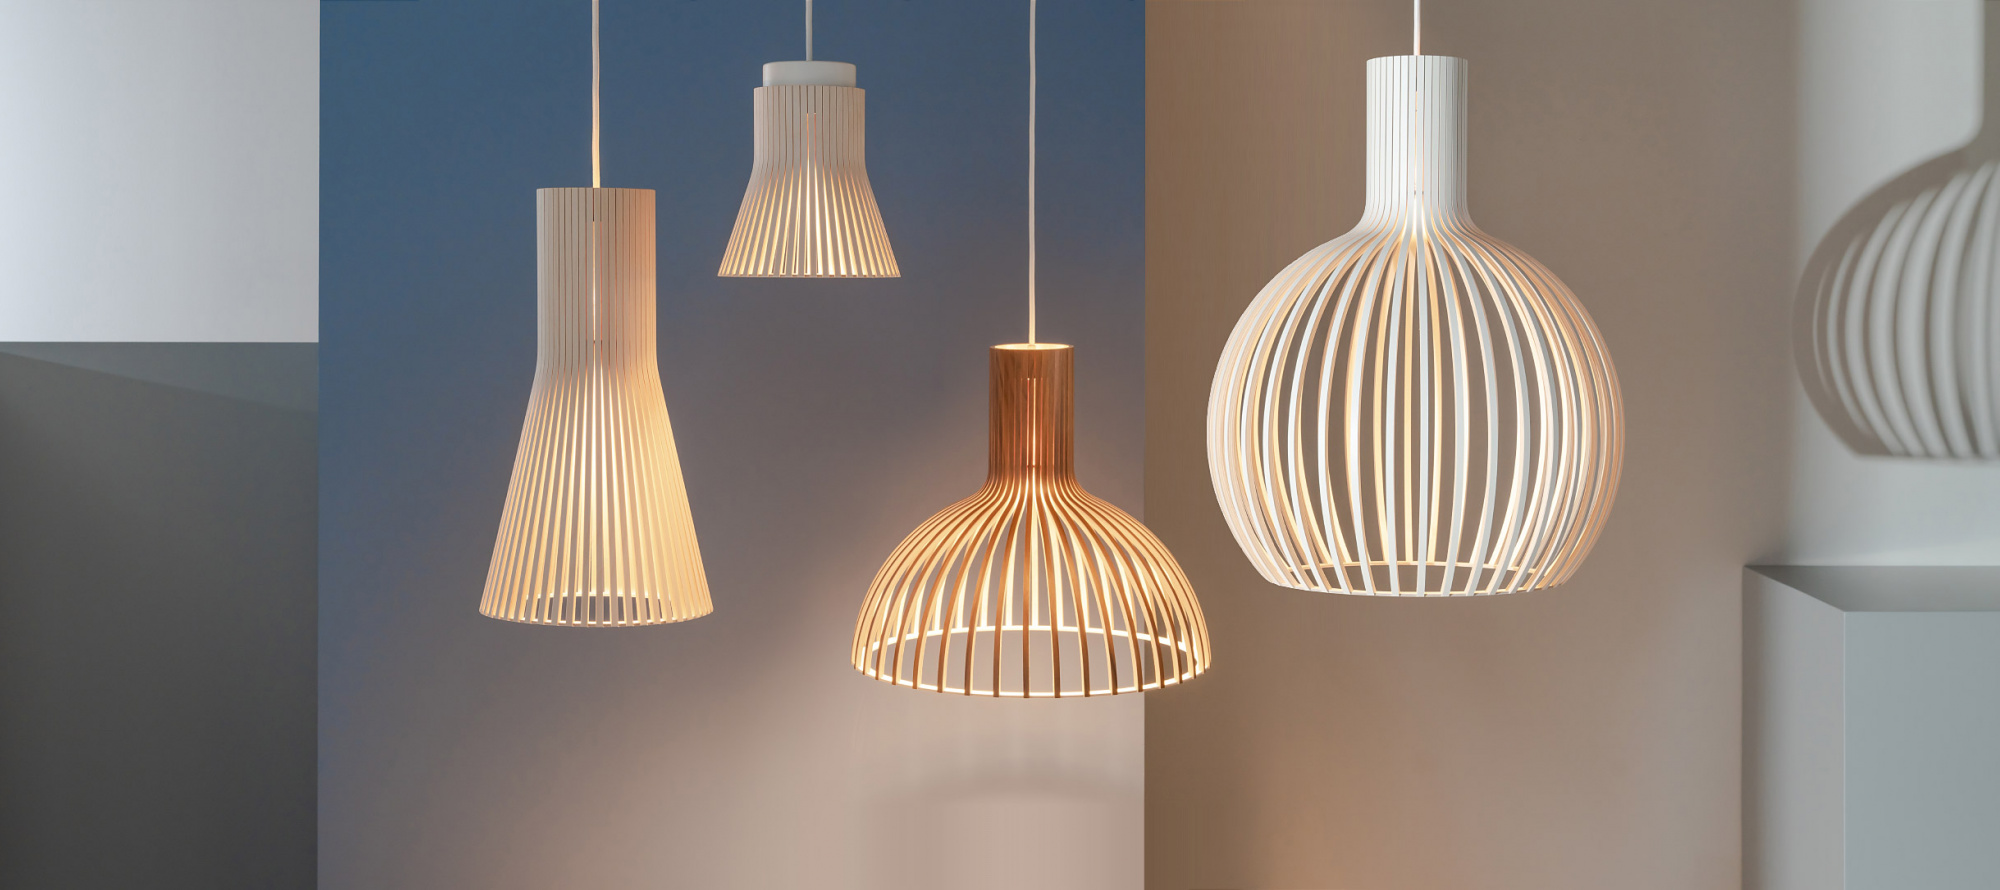 Information on the Secto Design lamps Design